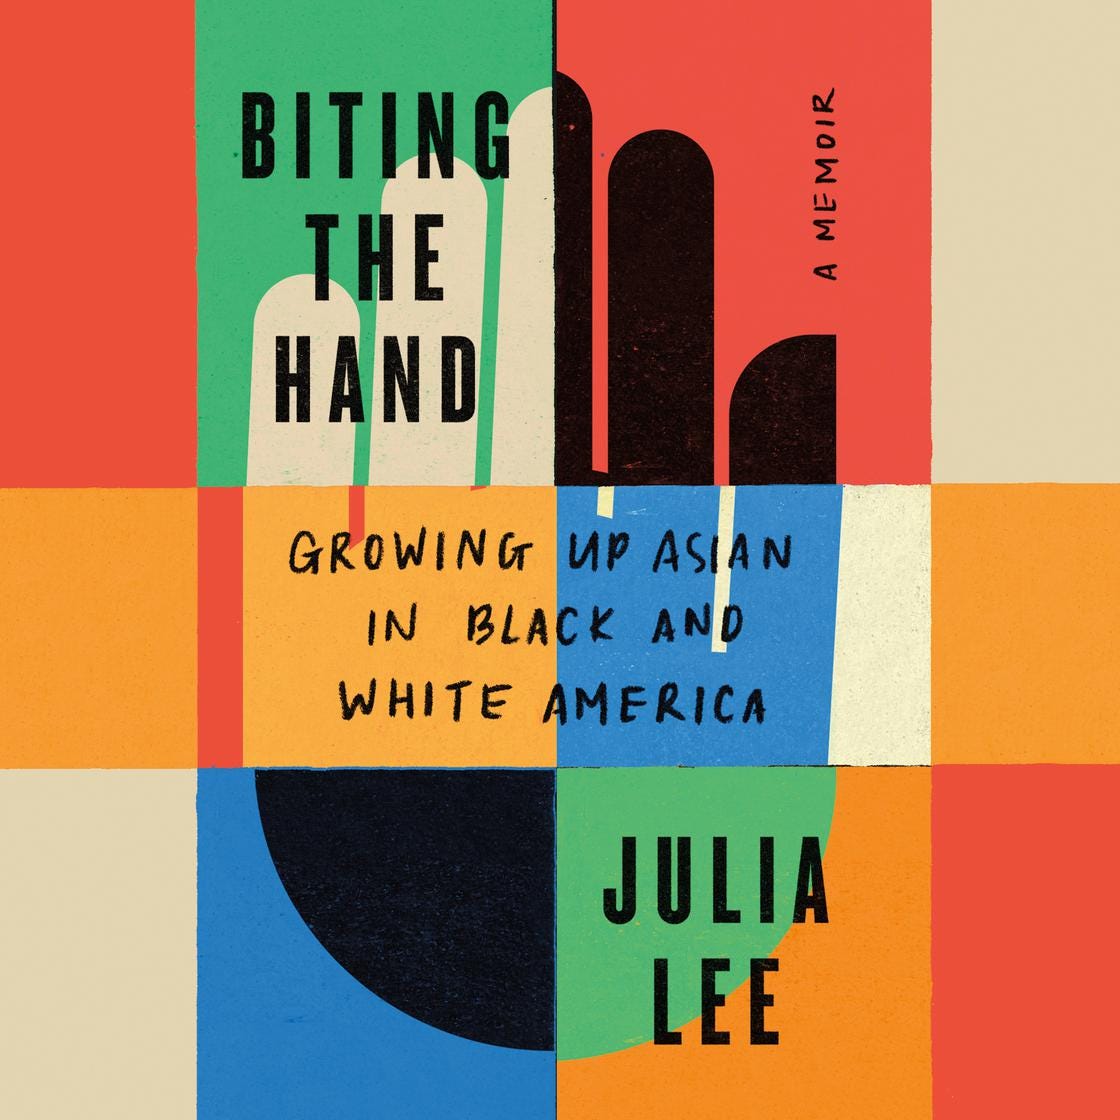 Audiobook cover of Biting the Hand.